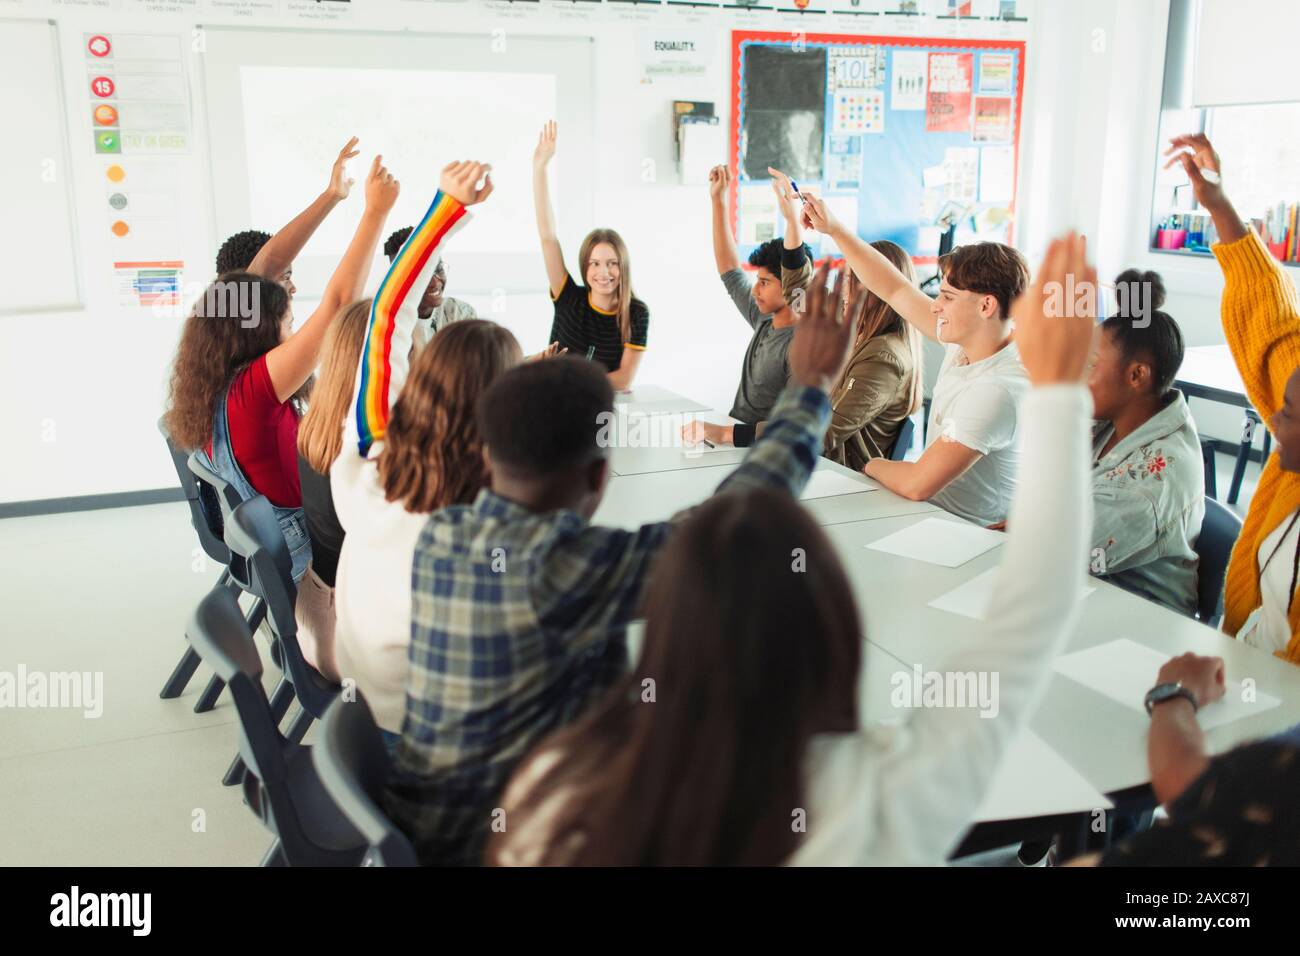 High school students with hands raised in debate class Stock Photo